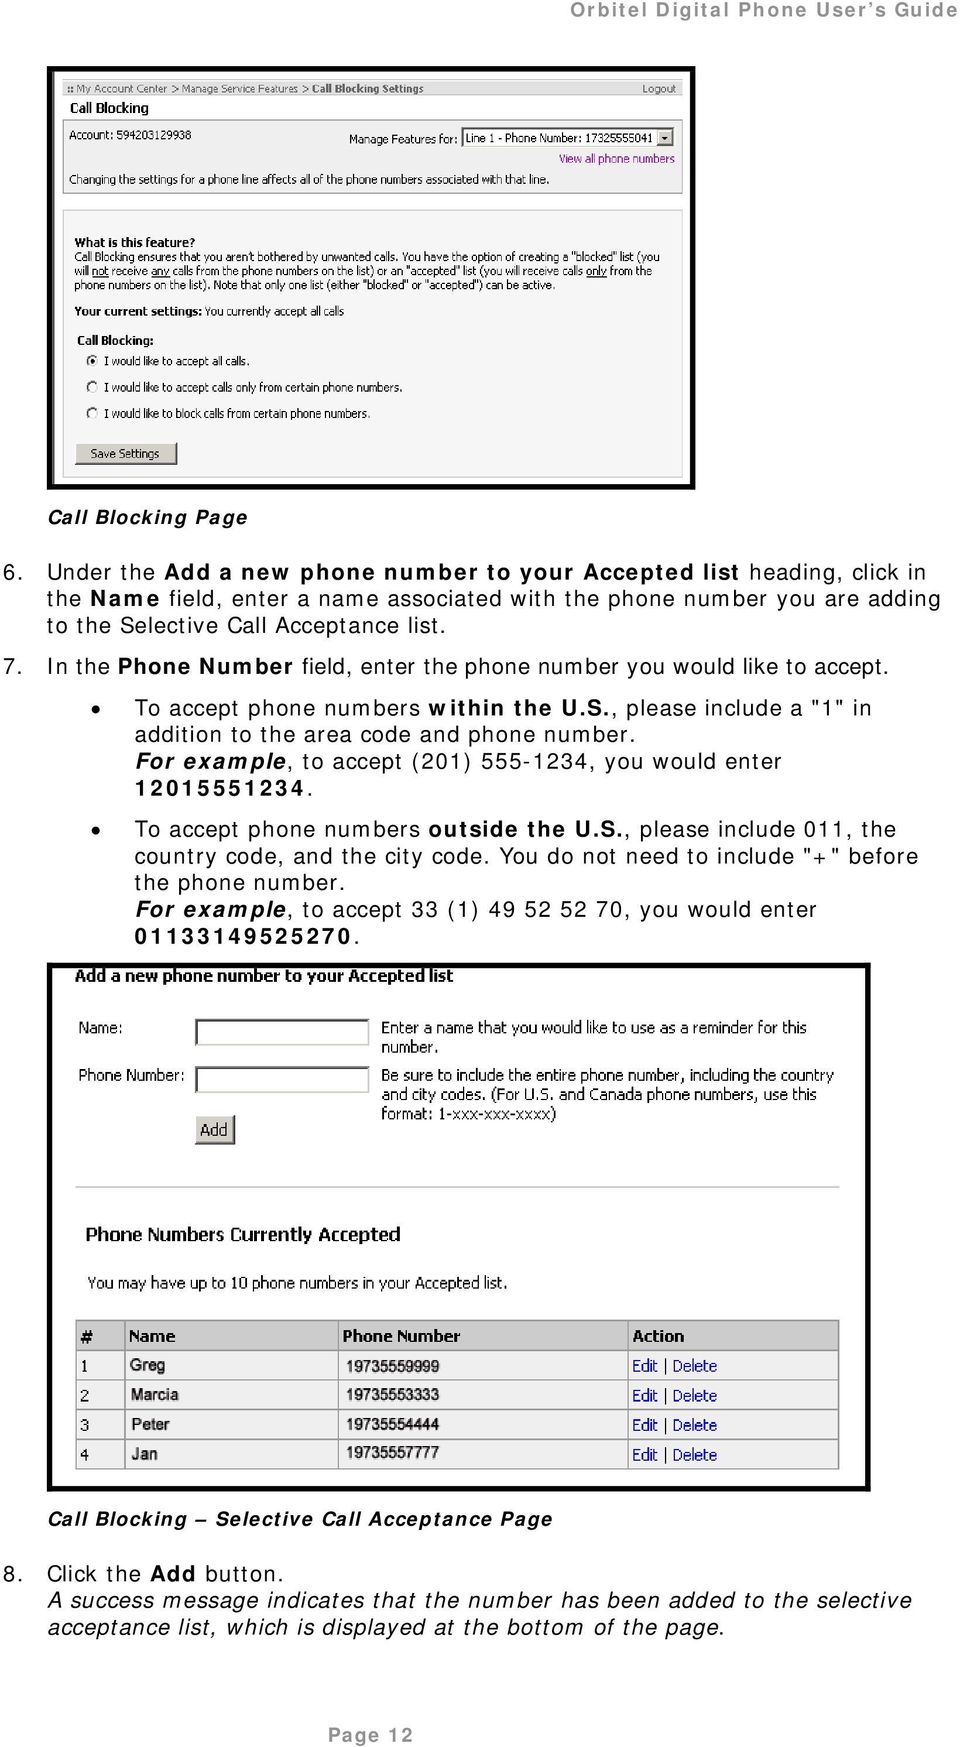 In the Phone Number field, enter the phone number you would like to accept. To accept phone numbers within the U.S., please include a "1" in addition to the area code and phone number.